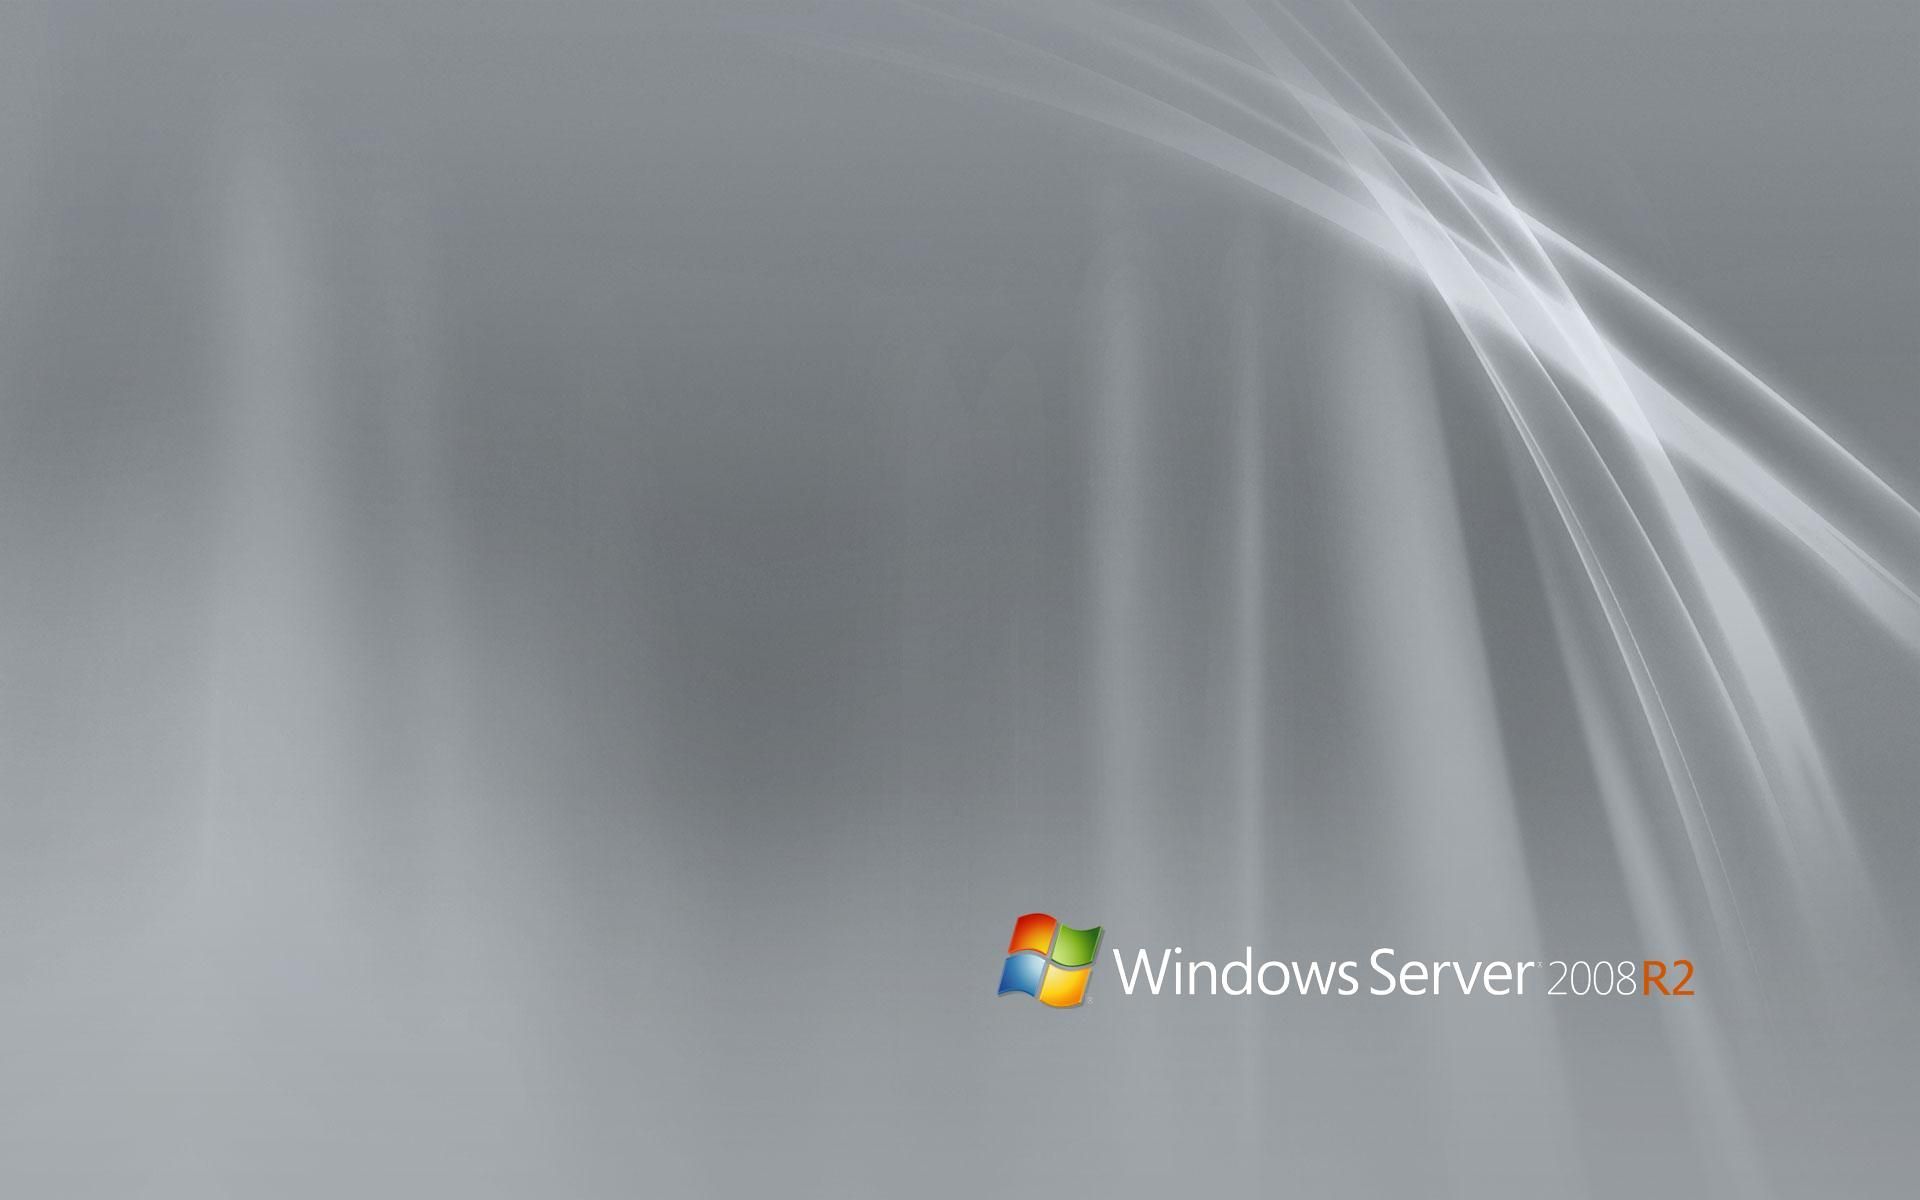 Windows 2015 Server Wallpaper And Background. Windows server, Windows, Windows 7 themes